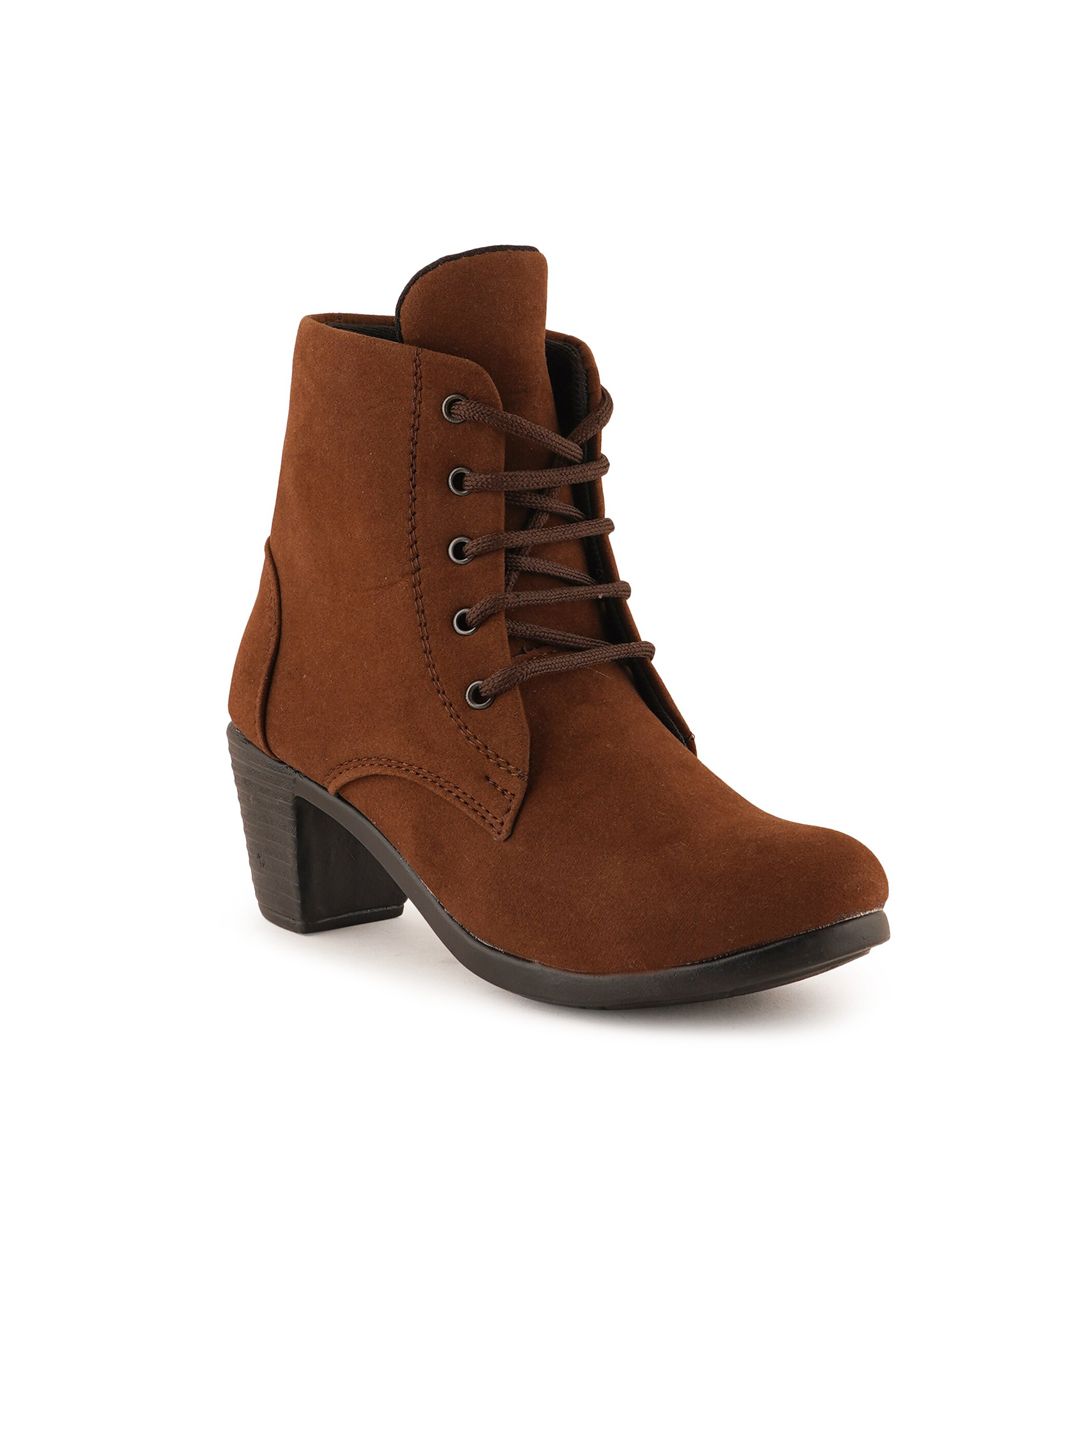 SAPATOS Women Brown Solid Suede Flat Boots Price in India